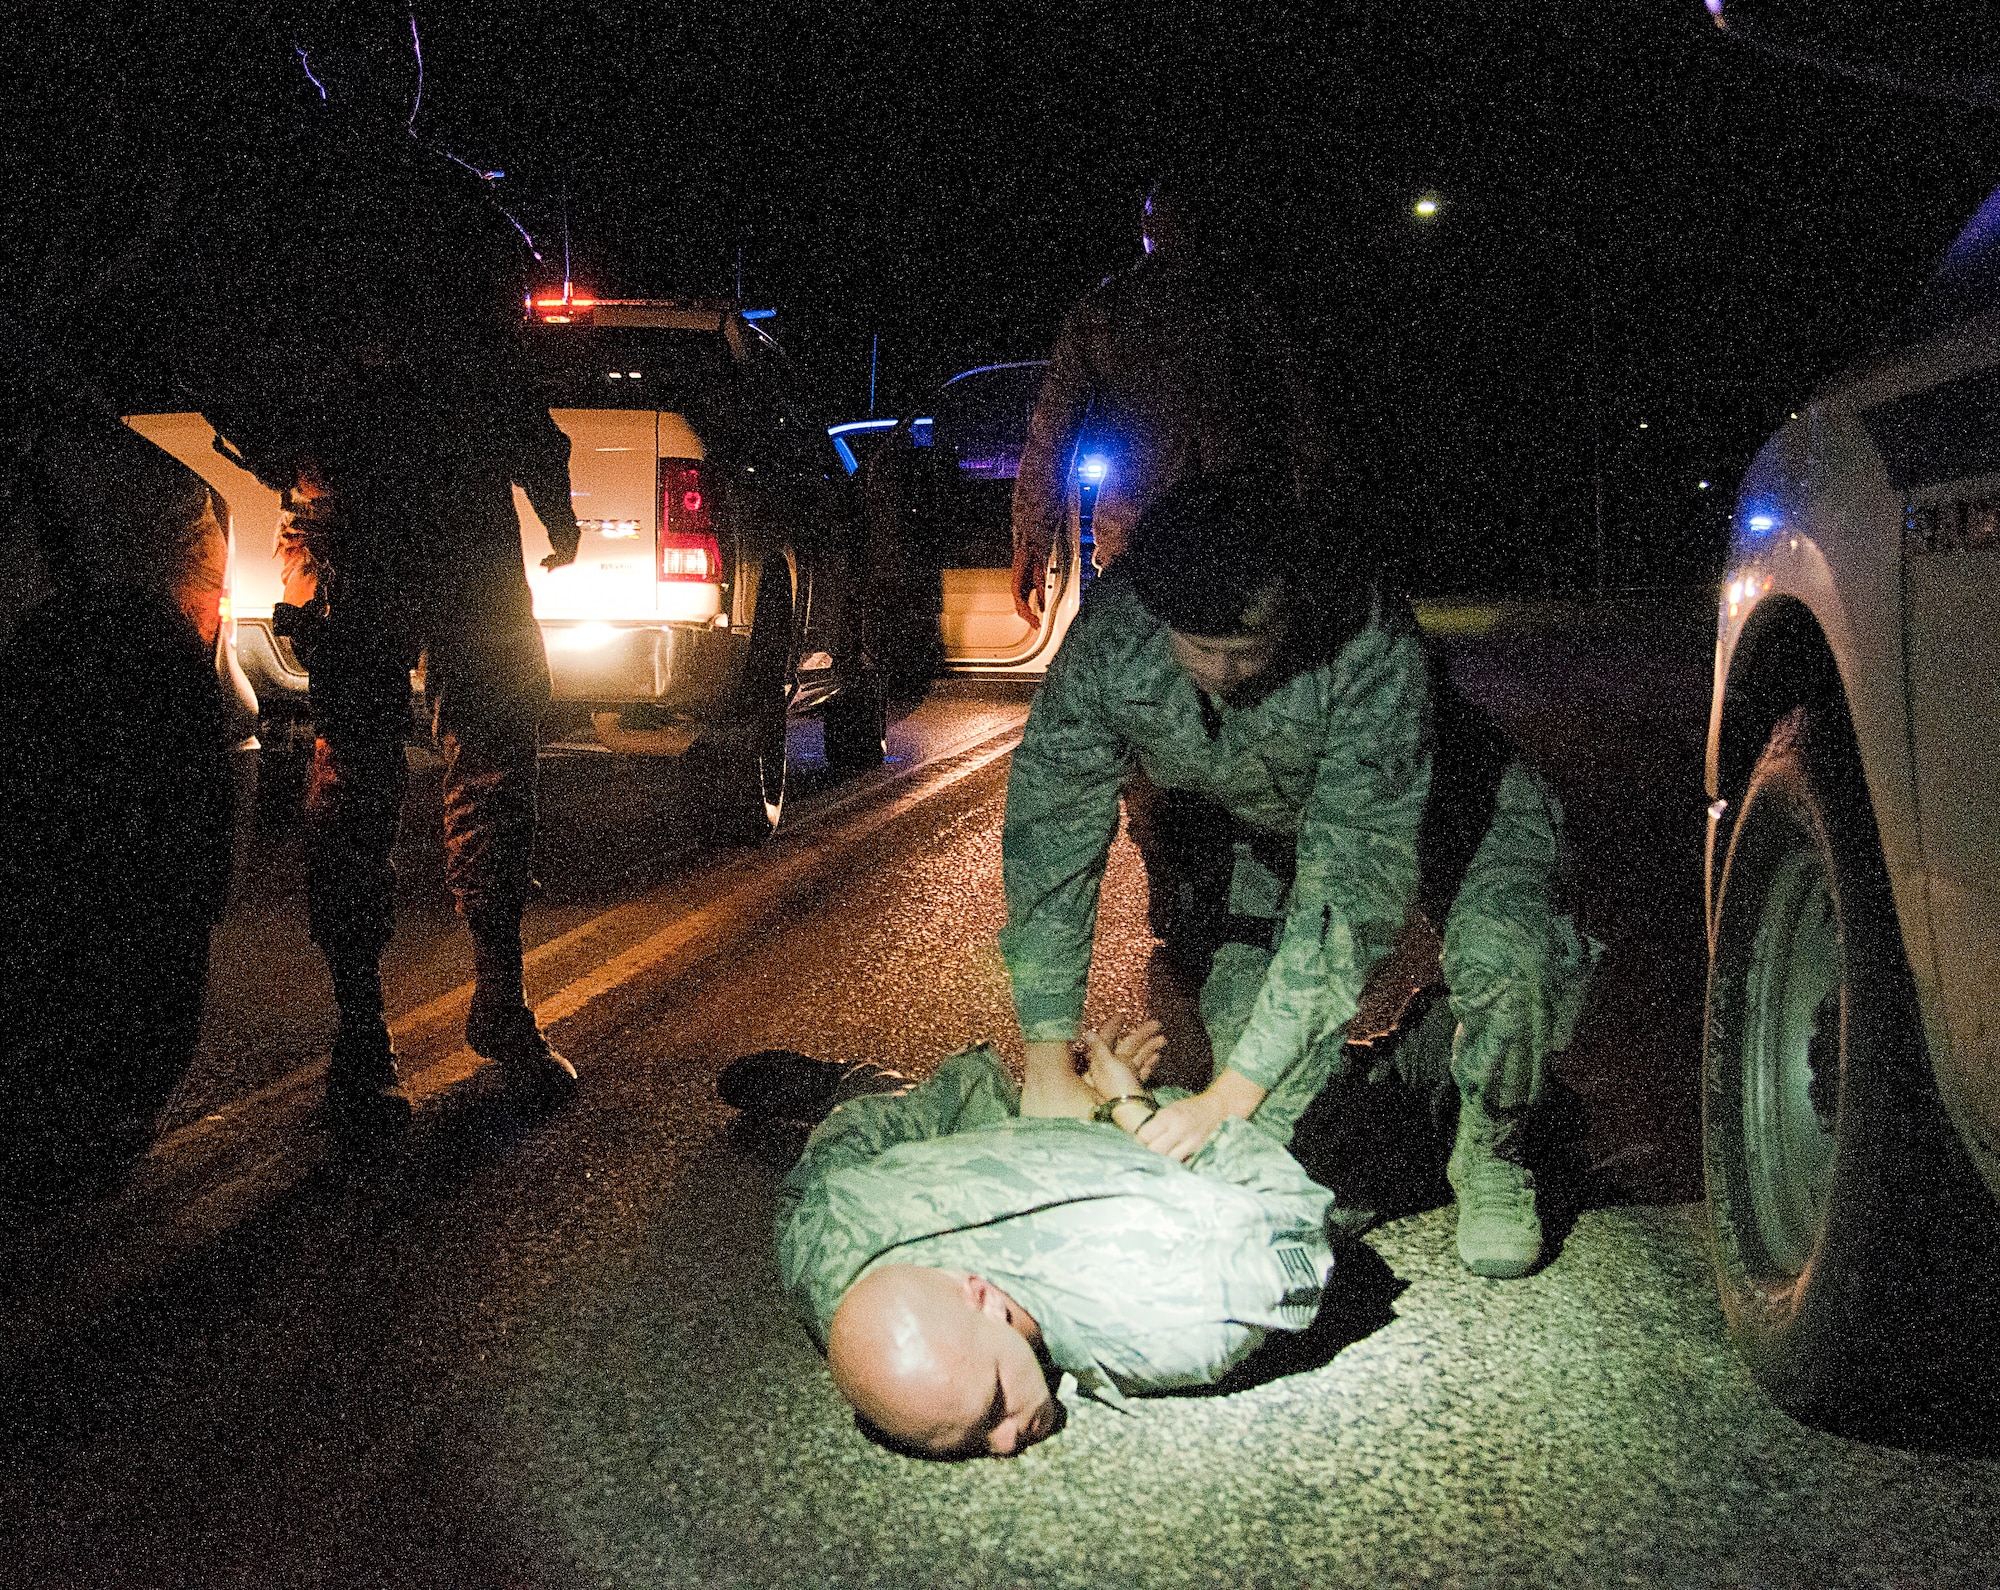 Senior Airman Zachary Downey, 90th Security Forces Squadron Delta Flight, pins down and handcuffs Technical Sgt. Andreas Niemetschek, 90th SFS Delta Flight chief, during a nighttime training exercise Aug. 6, 2015, on F.E. Warren Air Force Base, Wyo. Every shift, day and night, 90th SFS defenders undergo at least one training exercise to keep their law enforcement skills sharp. Niemetschek simulated a gate runner and led Delta Flight on a car chase through the base before being surrounded and subdued. Niemetschek was not apprehended except for exercise purposes only. (U.S. Air Force photo by Senior Airman Jason Wiese/Released)